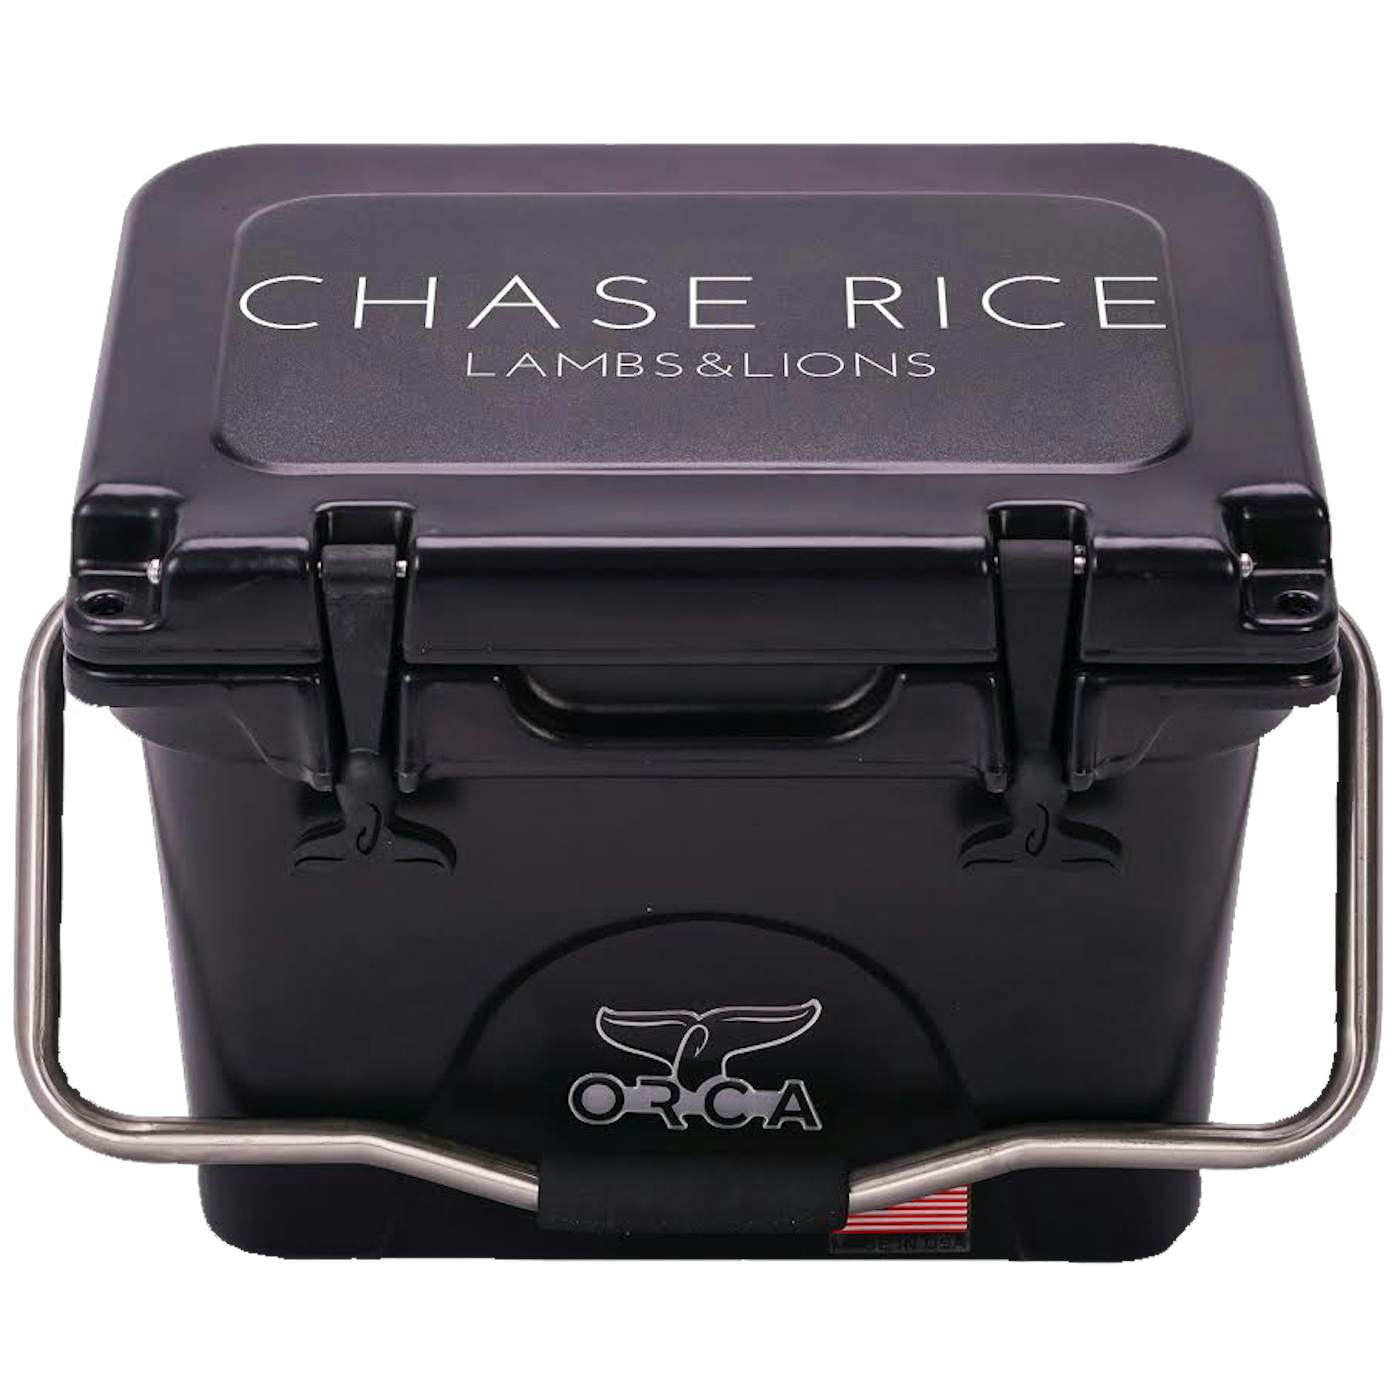 Chase Rice Lambs & Lions Cooler - 20qt